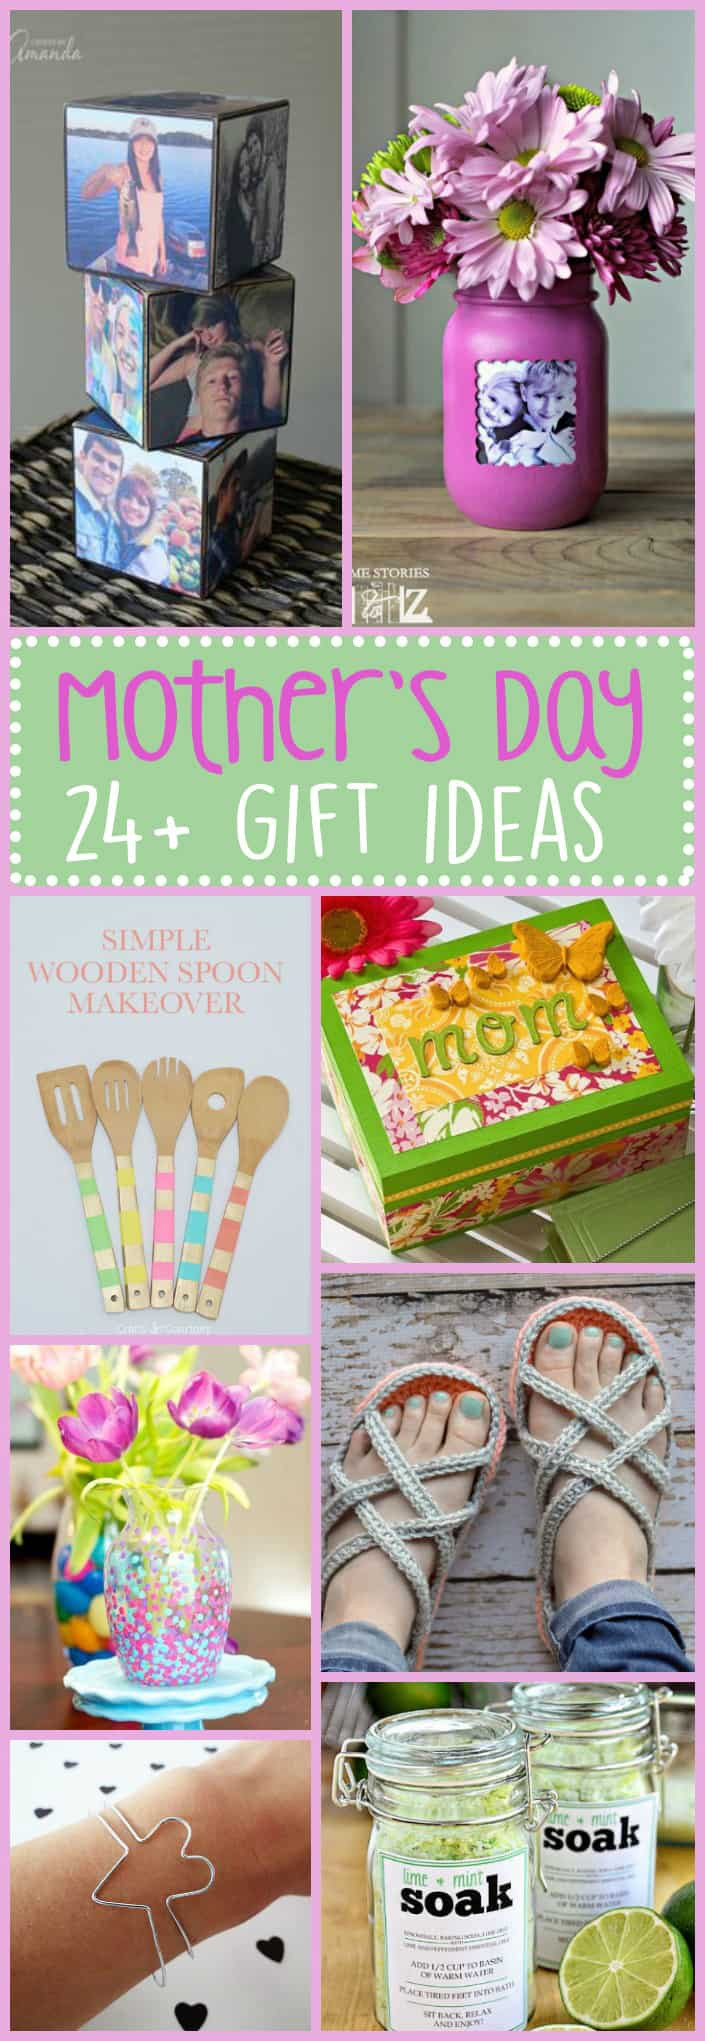 Mothers Day Gift Idears
 Mother s Day Gift Ideas 24 t ideas for Mother s Day